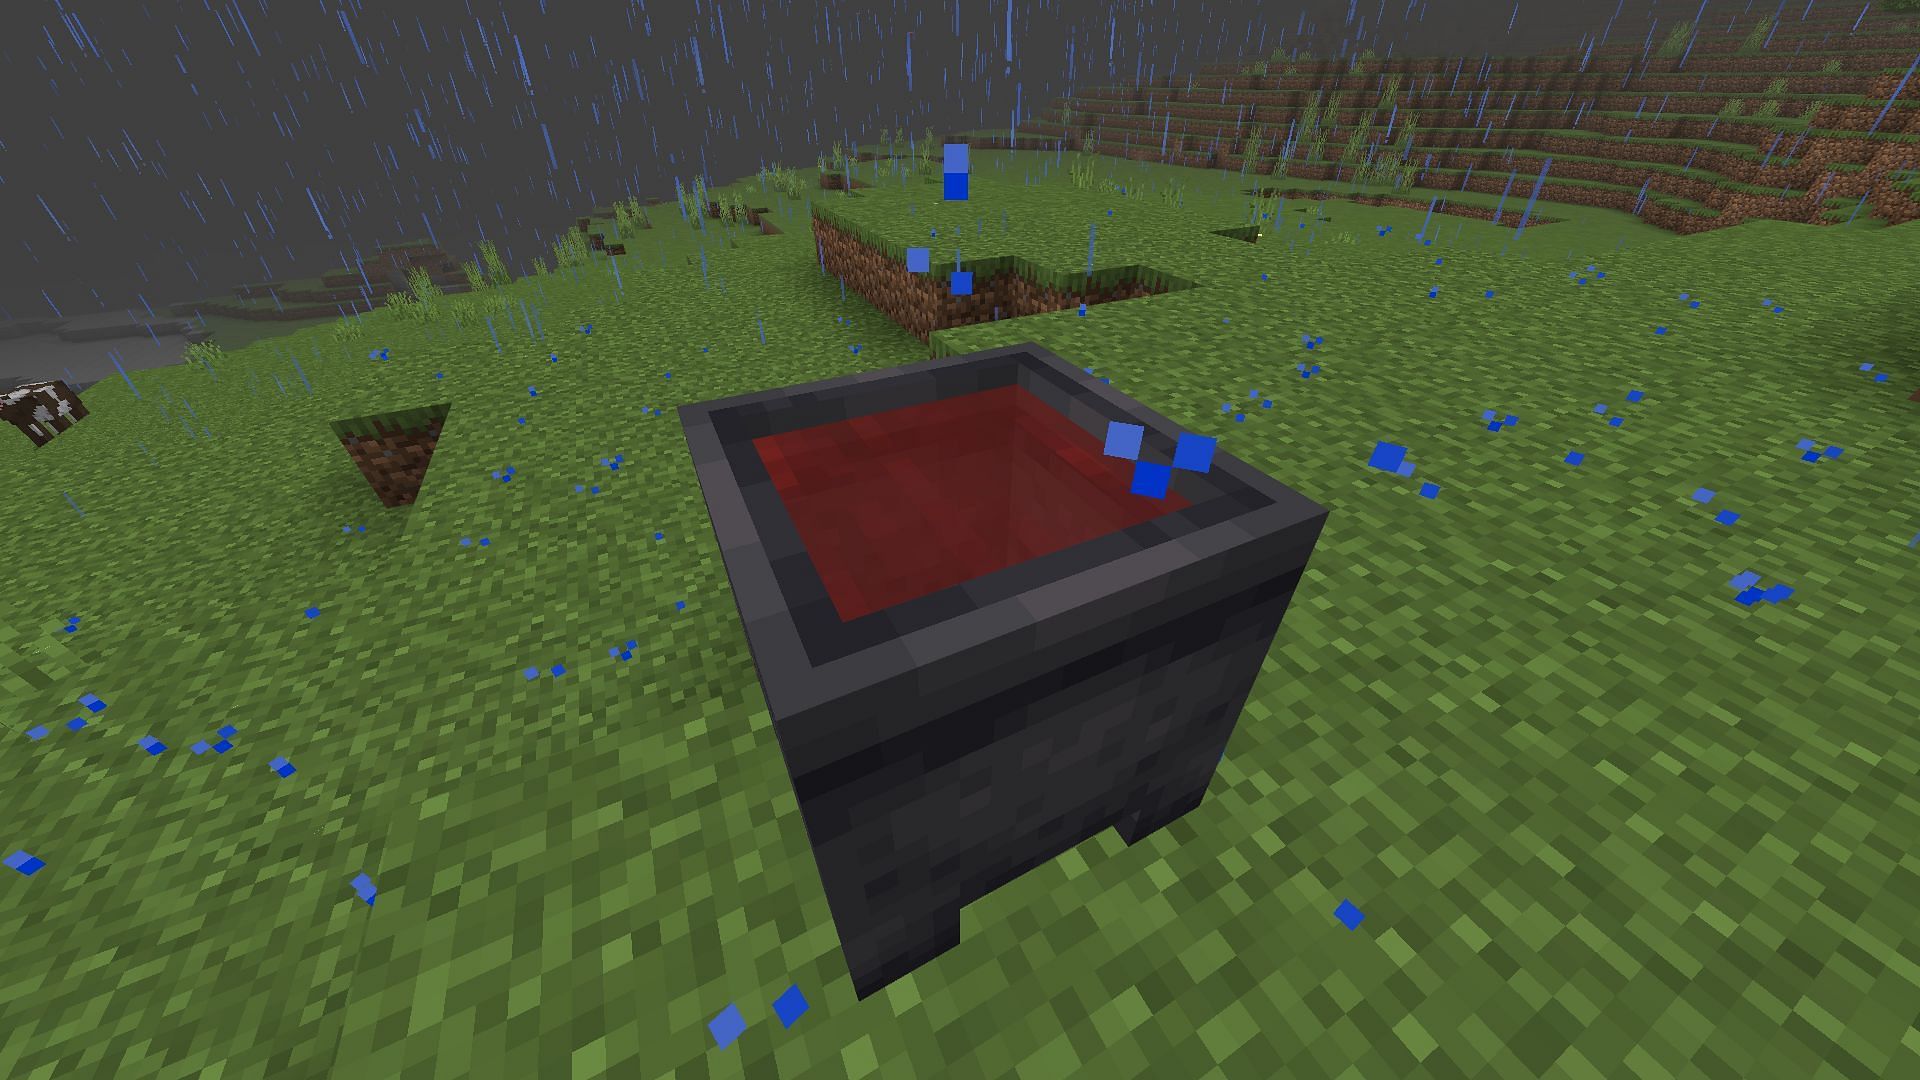 Players can color the water in the cauldron and use it to dye leather armor parts in Minecraft Bedrock Edition (Image via Mojang)